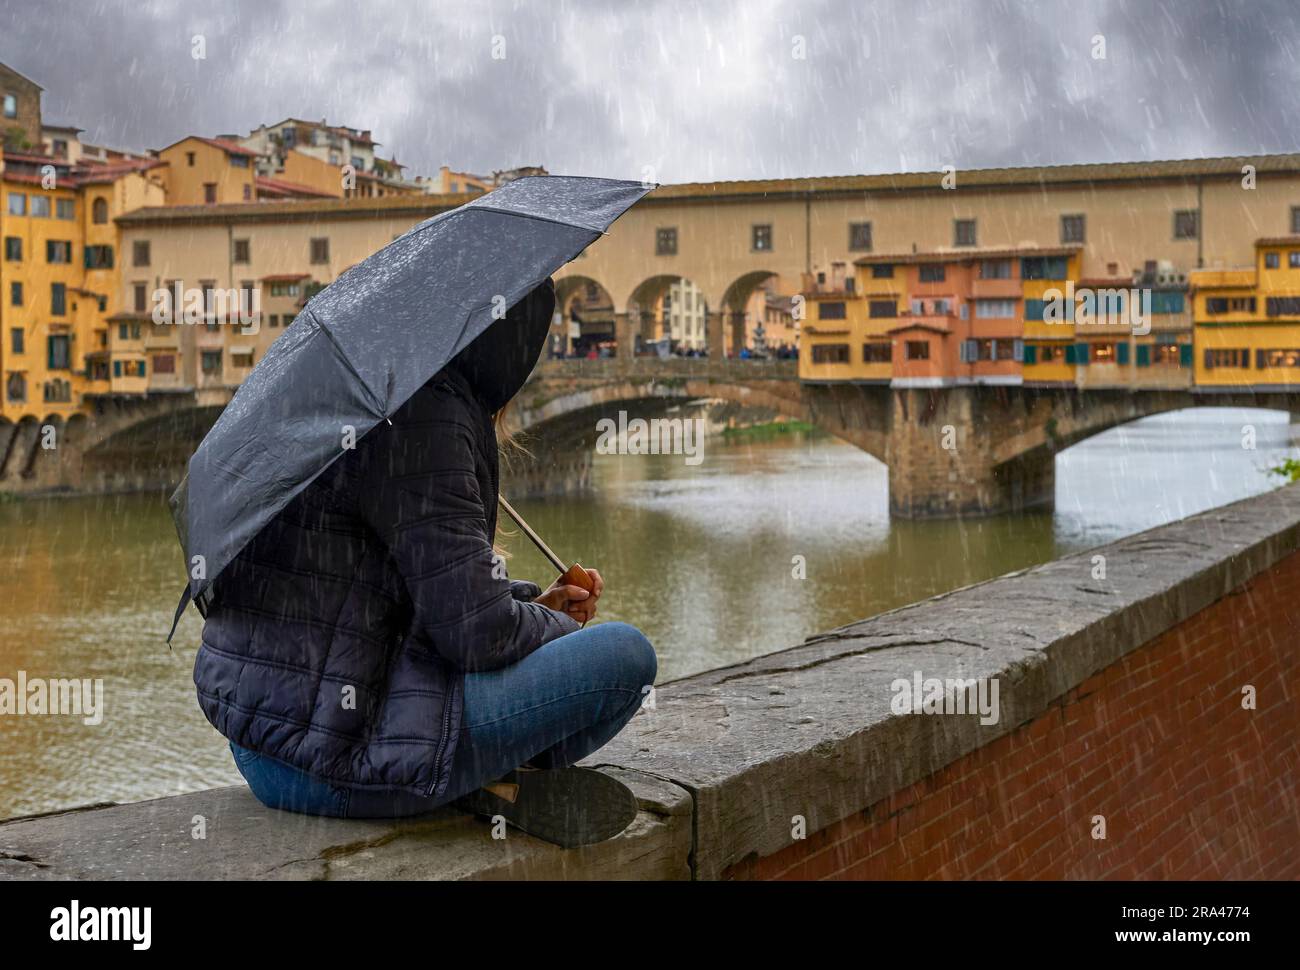 Girl under umbrella at Arno river promenade in the city center of Florence on a rainy day, Italy Stock Photo